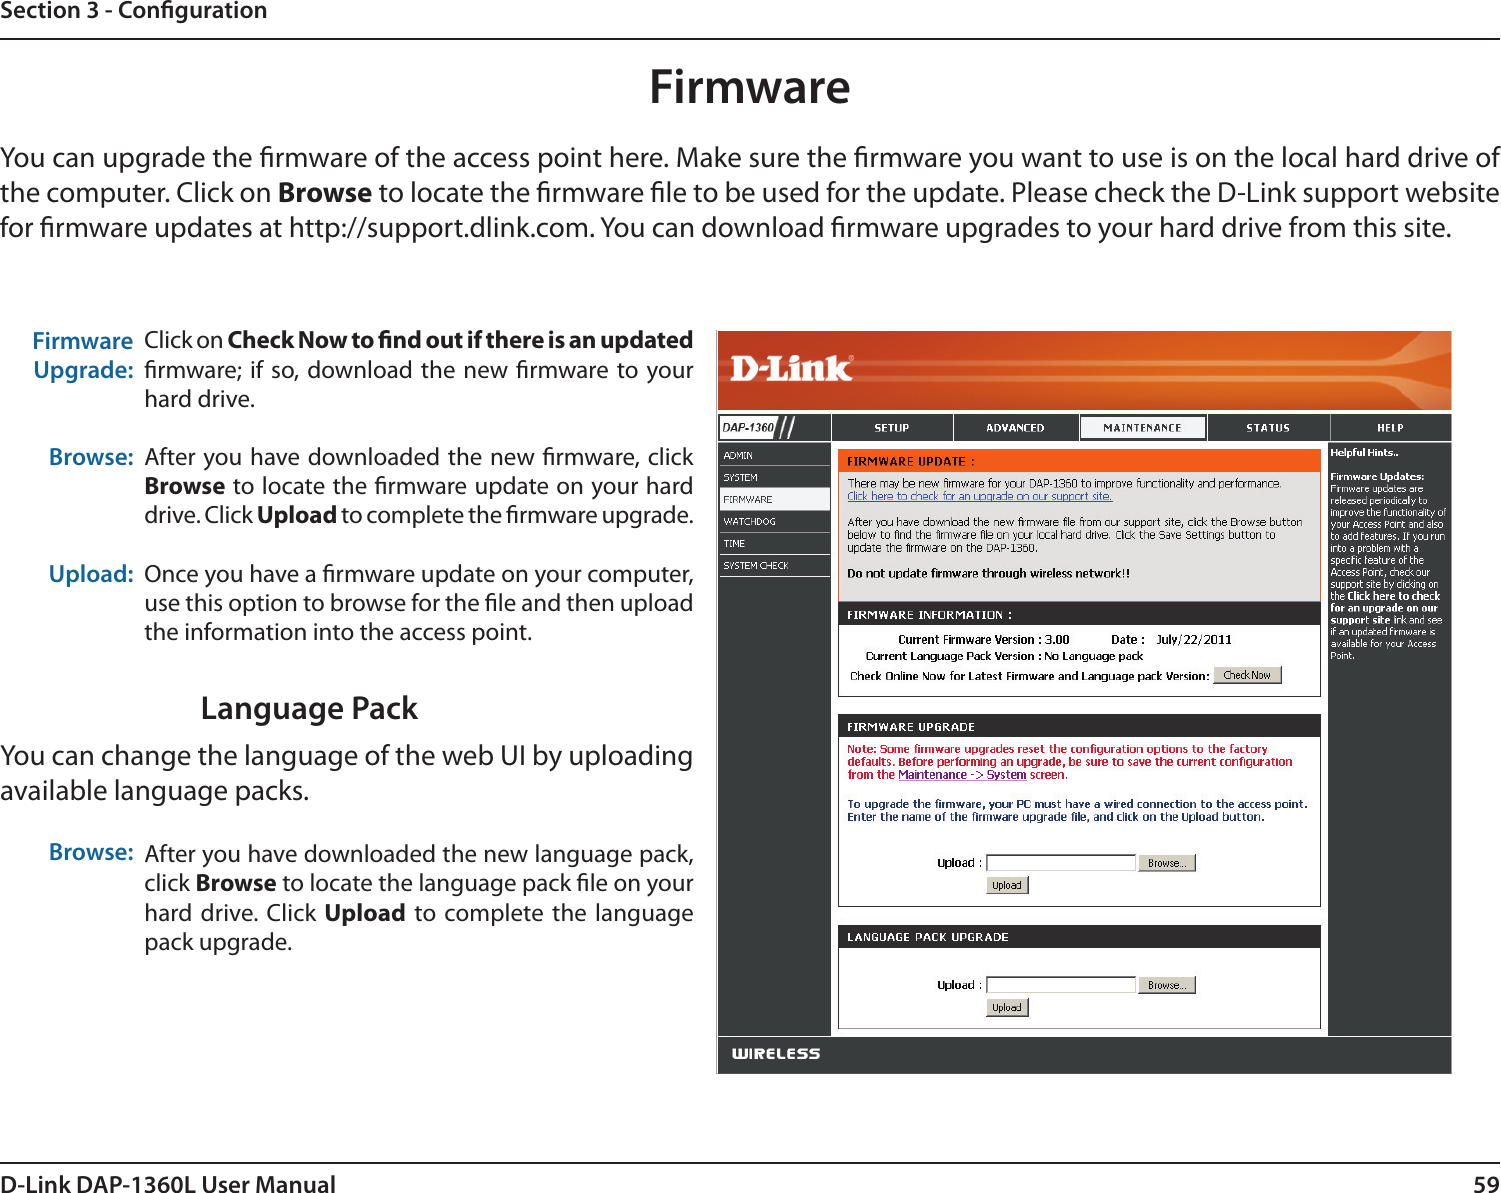 59D-Link DAP-1360L User ManualSection 3 - CongurationFirmwareUpgrade: Browse:Upload:Click on Check Now to nd out if there is an updated rmware; if so, download the new rmware to your hard drive.After you have downloaded the new rmware, click Browse to locate the rmware update on your hard drive. Click Upload to complete the rmware upgrade.Once you have a rmware update on your computer, use this option to browse for the le and then upload the information into the access point. FirmwareYou can upgrade the rmware of the access point here. Make sure the rmware you want to use is on the local hard drive of the computer. Click on Browse to locate the rmware le to be used for the update. Please check the D-Link support website for rmware updates at http://support.dlink.com. You can download rmware upgrades to your hard drive from this site.After you have downloaded the new language pack, click Browse to locate the language pack le on your hard drive. Click  Upload to complete the  language pack upgrade.Language PackYou can change the language of the web UI by uploading available language packs.Browse: